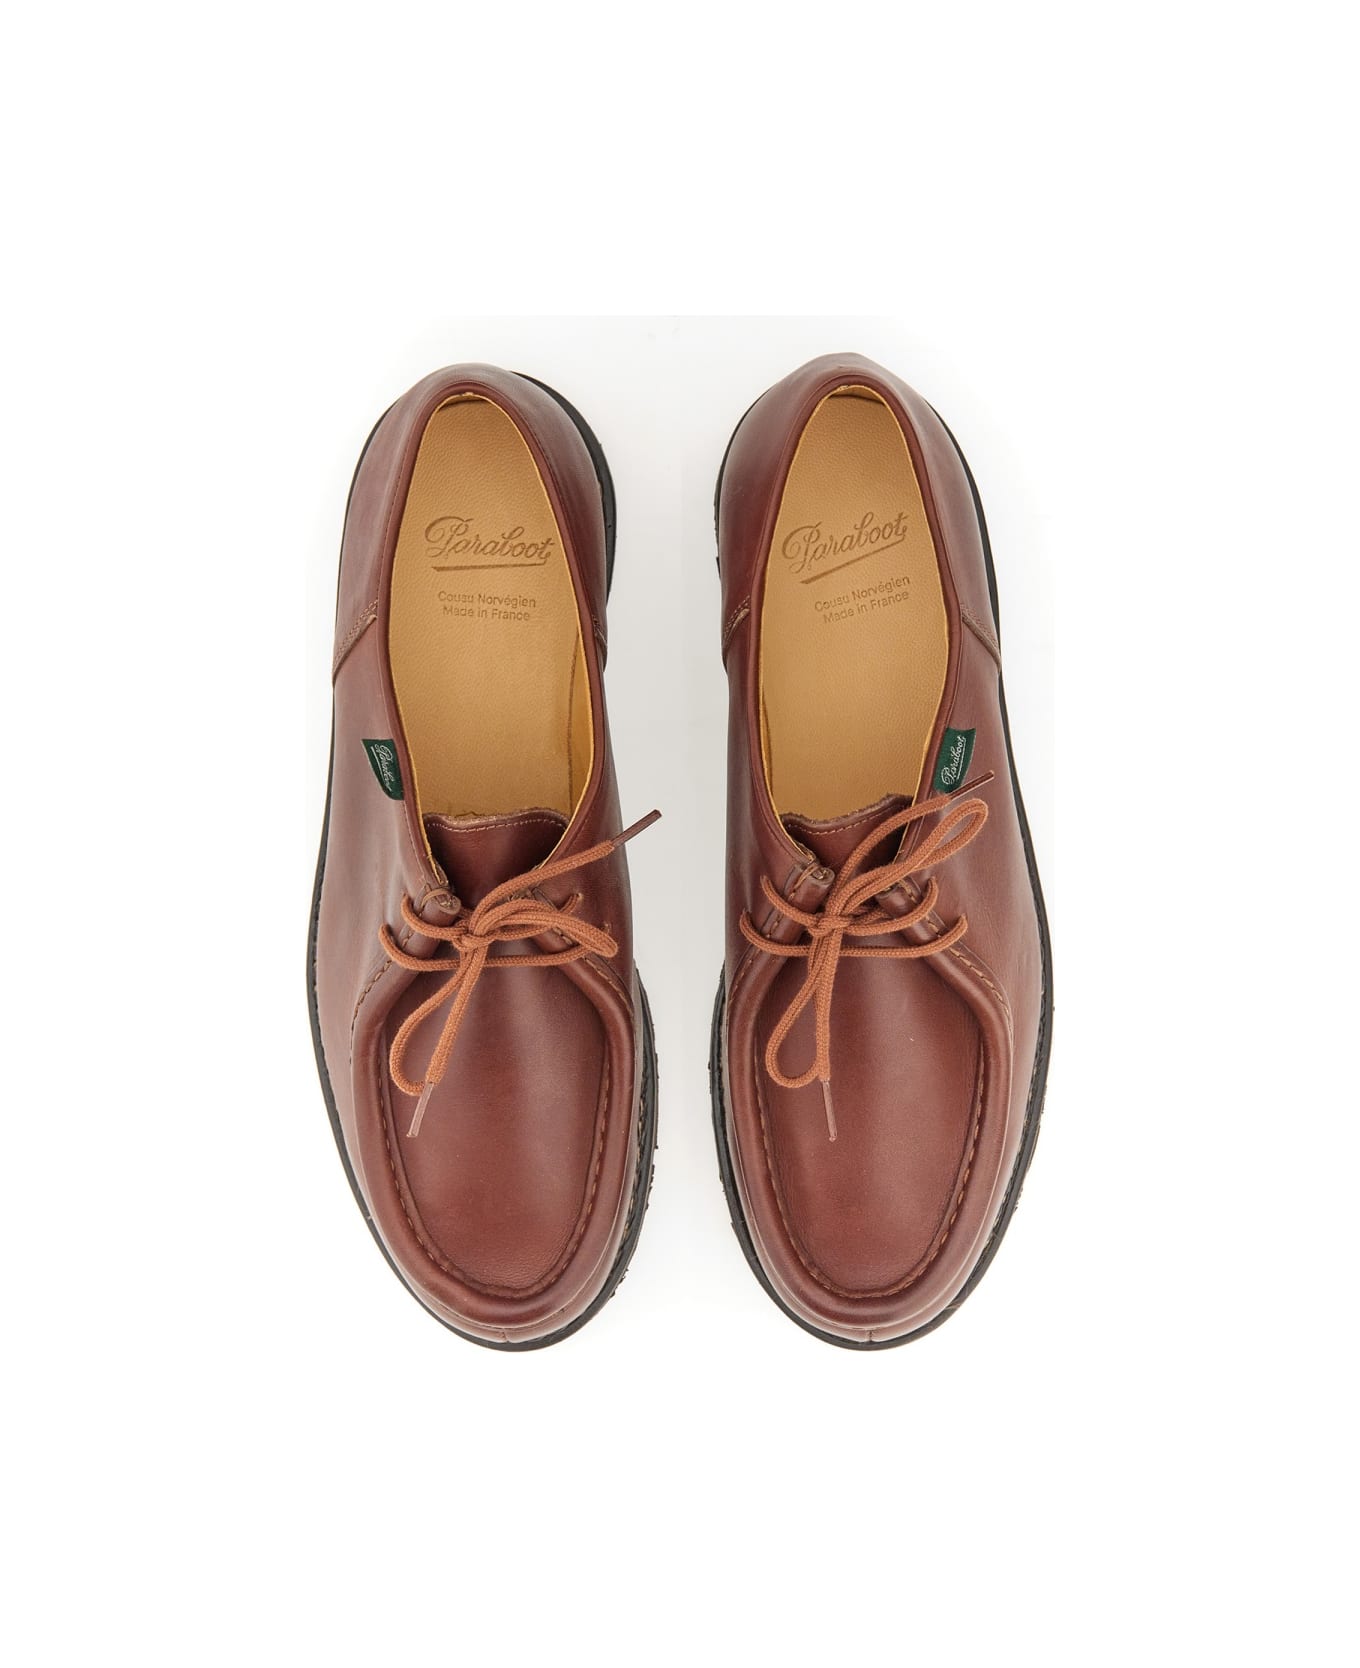 Paraboot Lace-up "michael" - BROWN